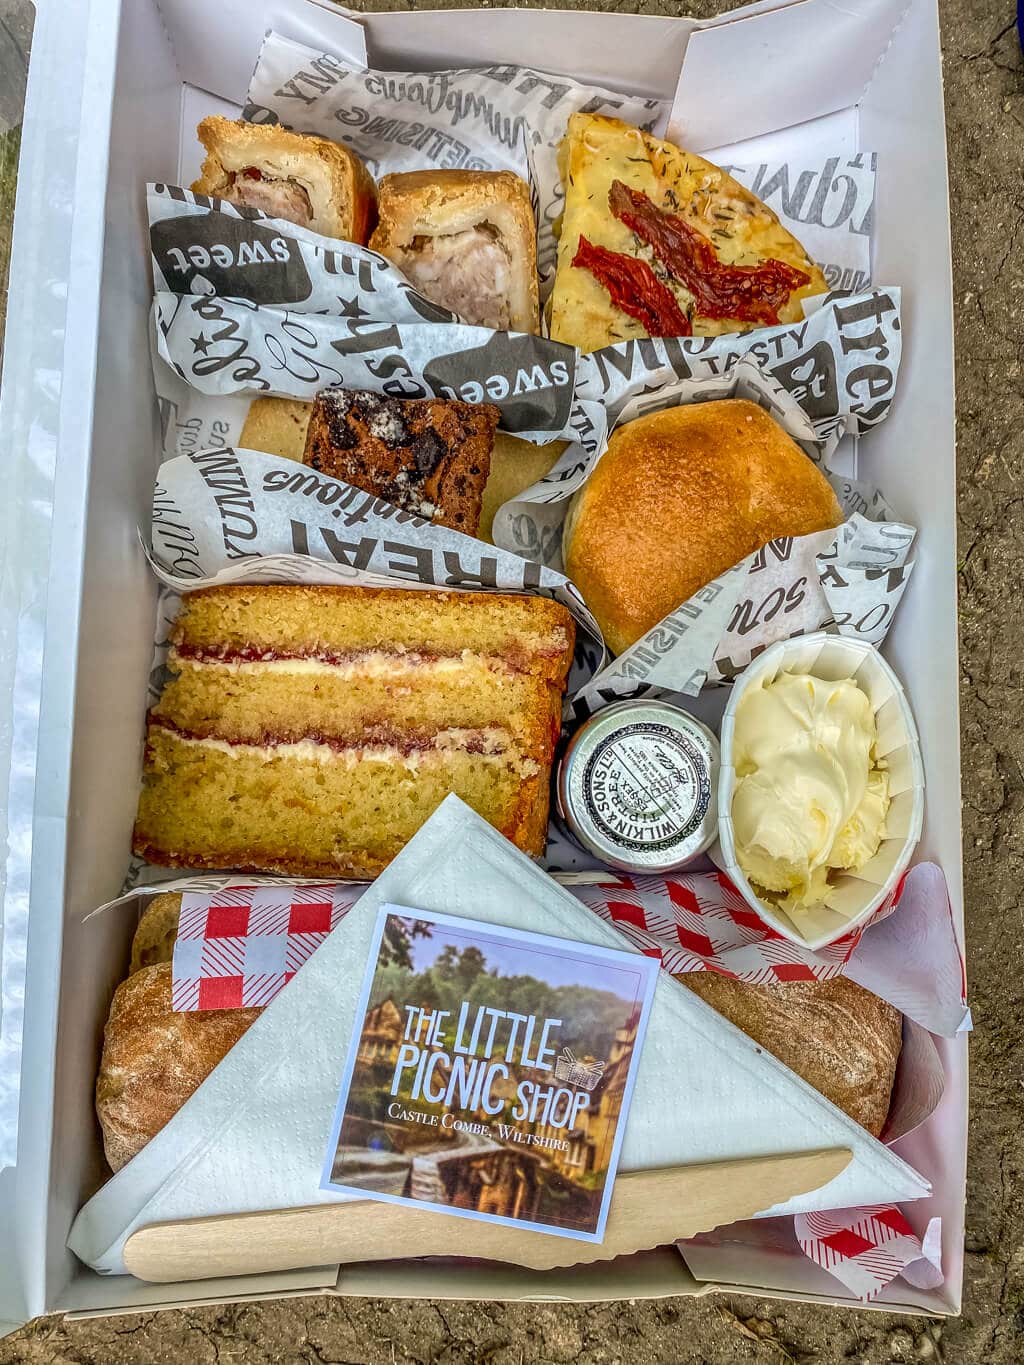 pork pies, spanish tortilla, cake, clotted cream, sandwich in the afternoon tea picnic box